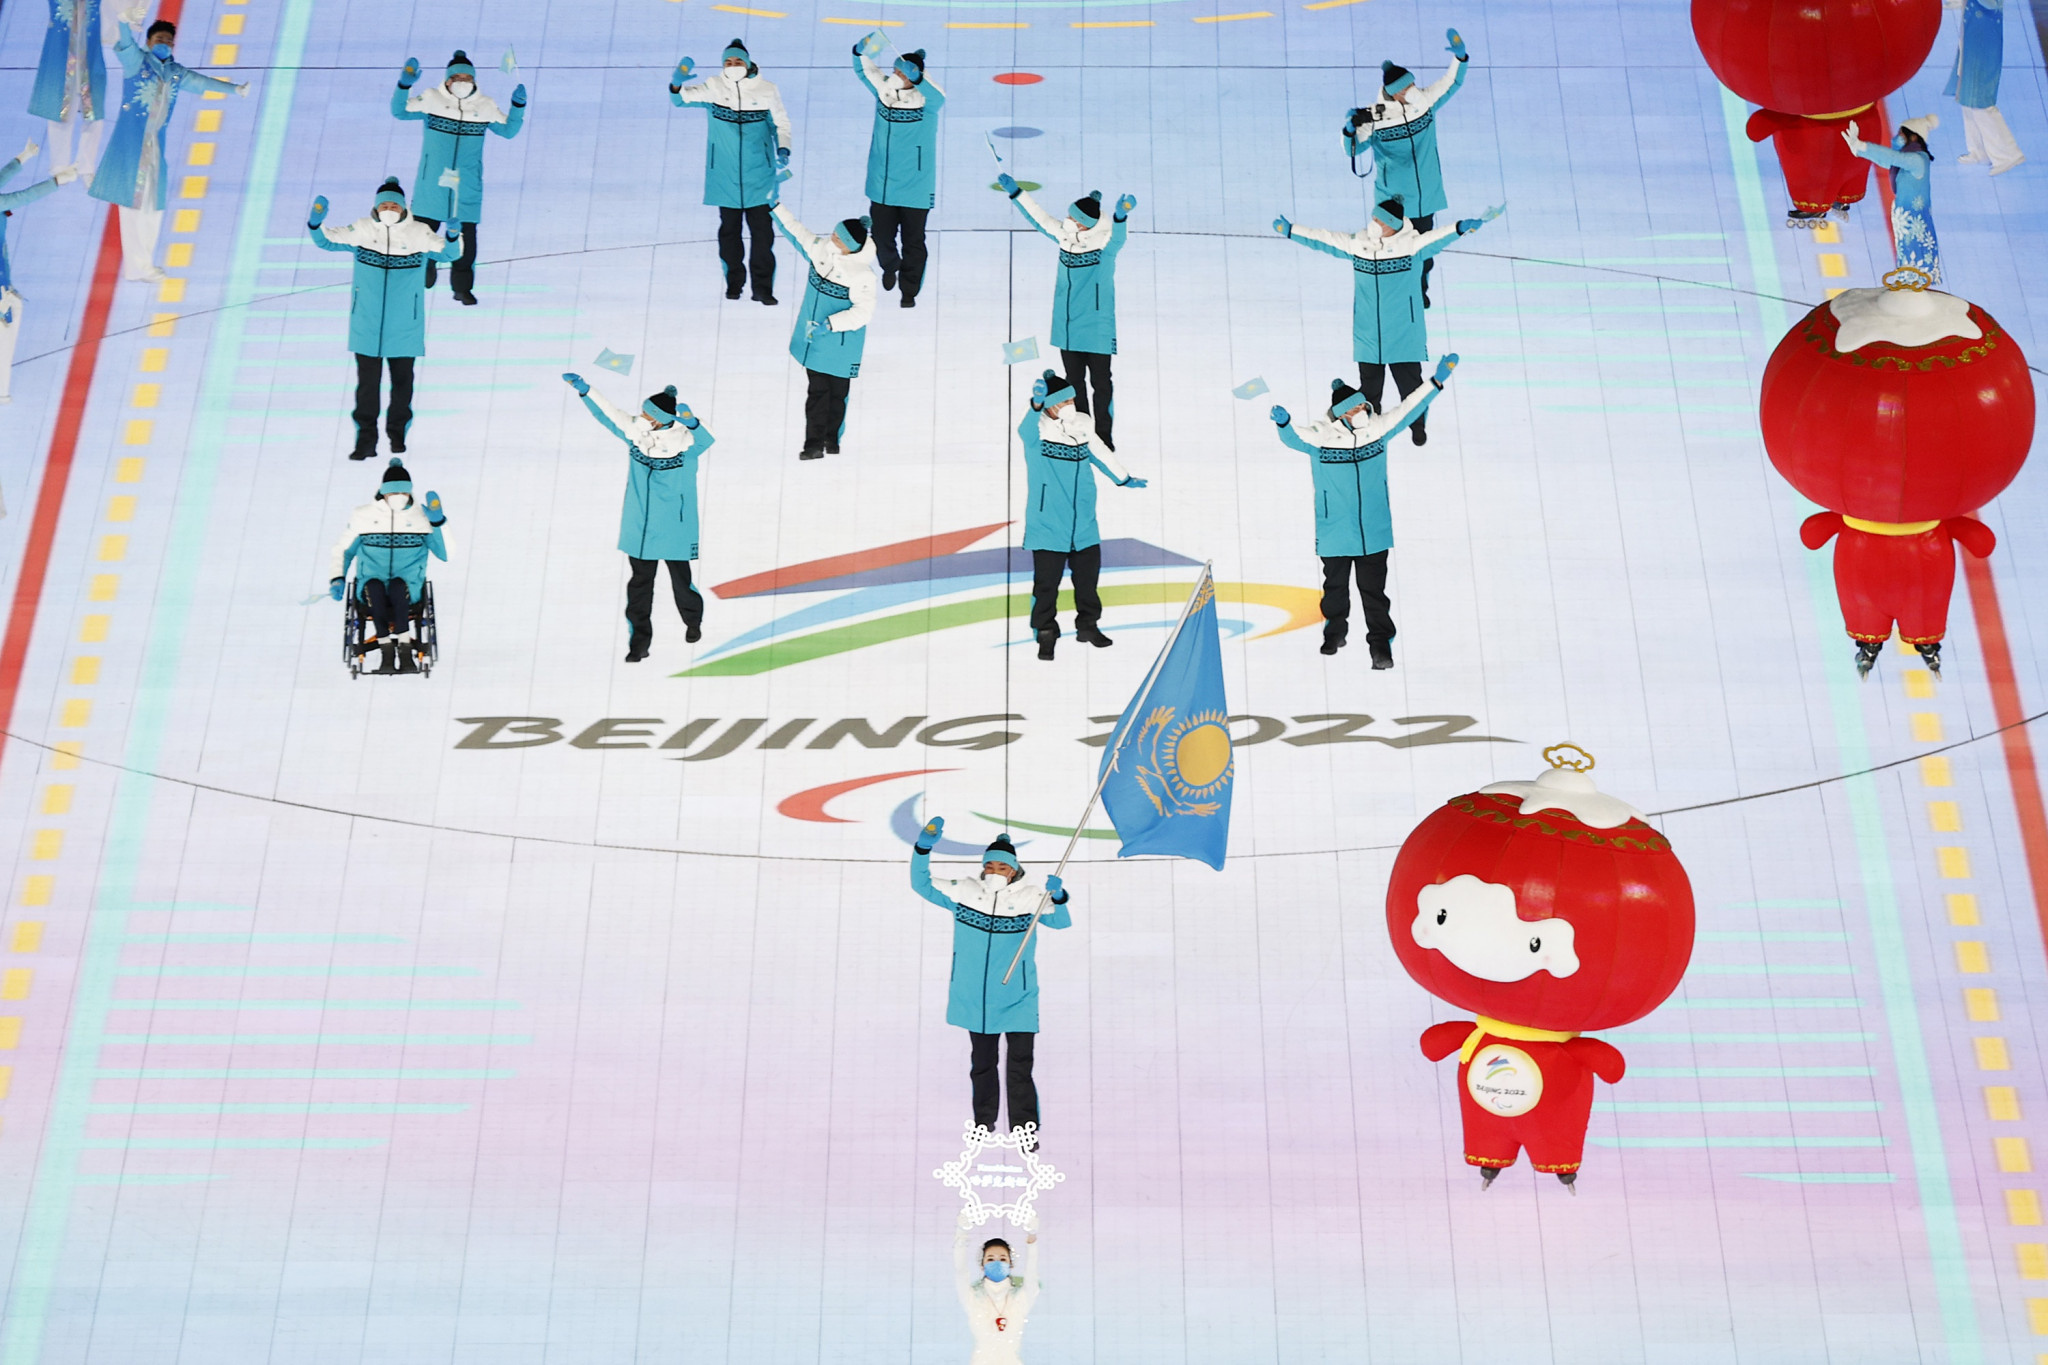 Kazakhstan among nations competing at Russia’s Paralympics replacement event as first medals awarded